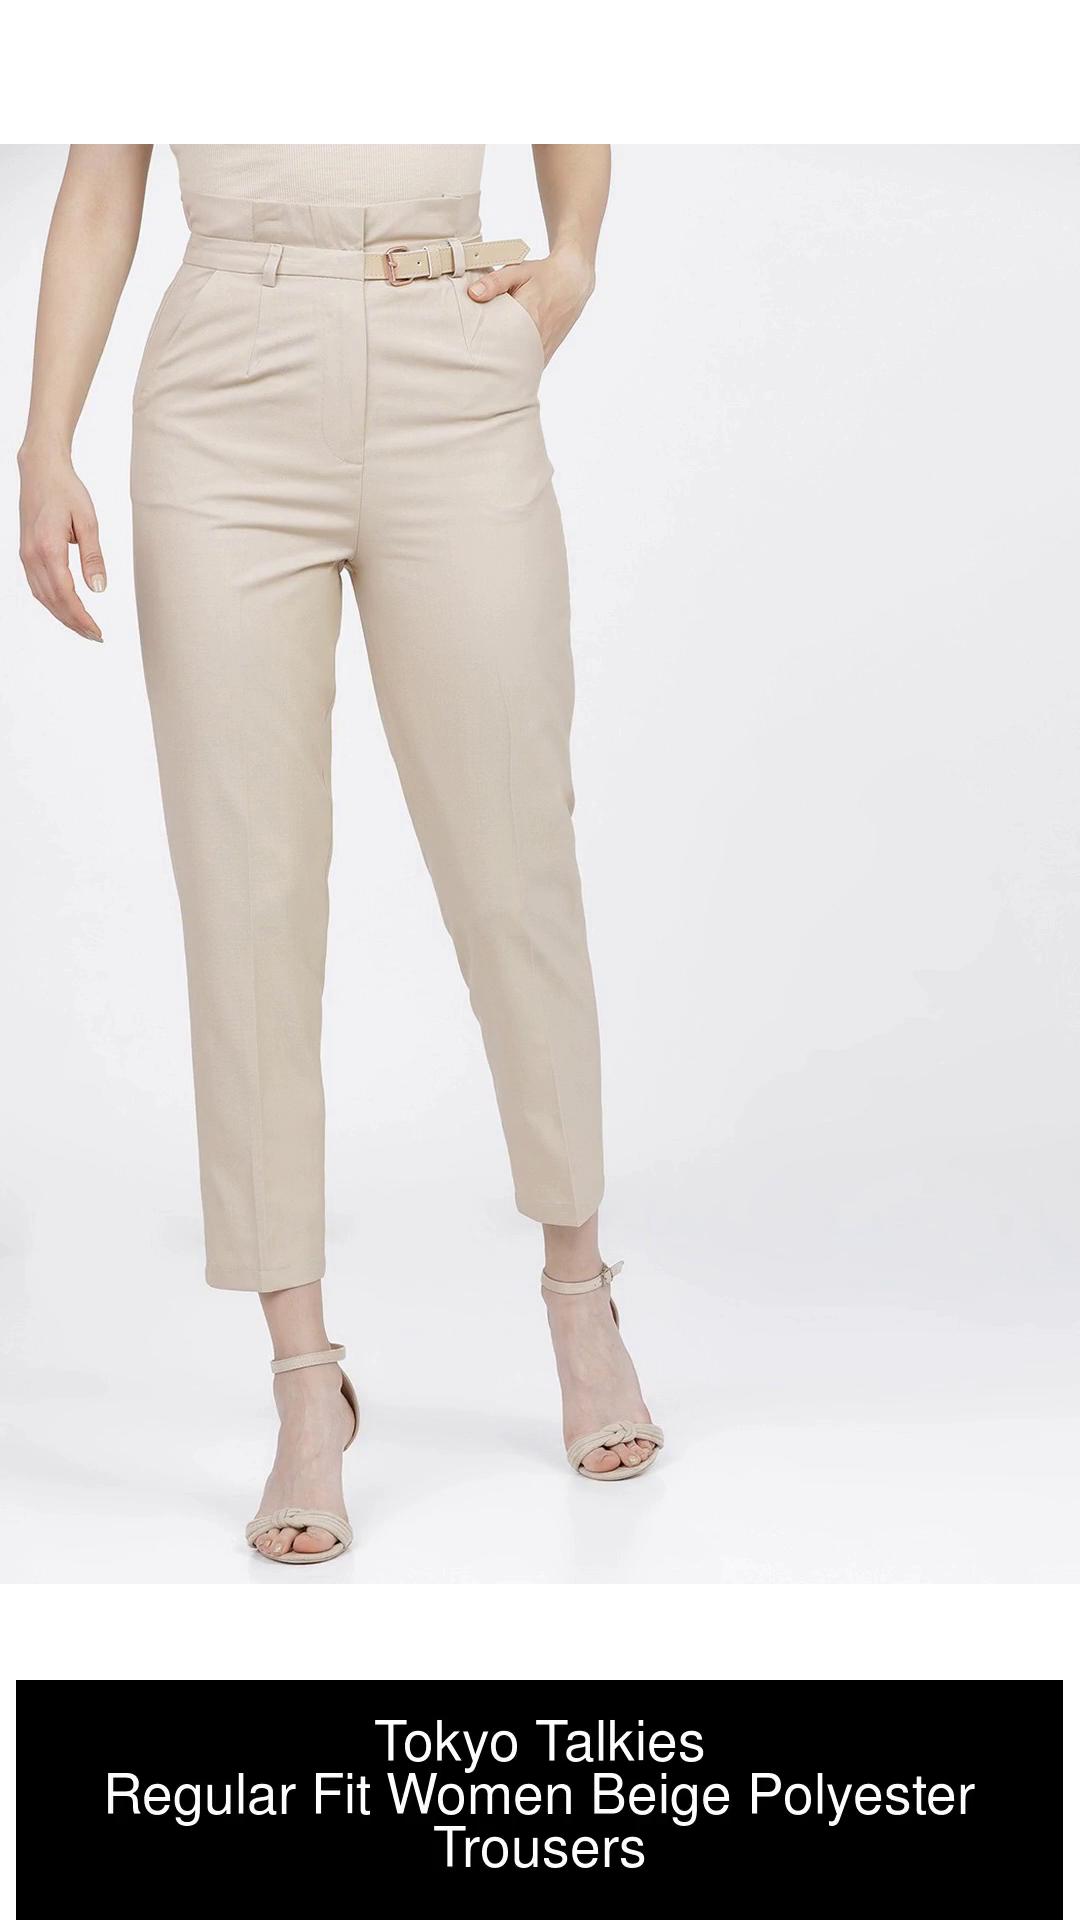 Hazelnut Cream with Black PlainSolid Regular Fit TerryRayon Pant For Women